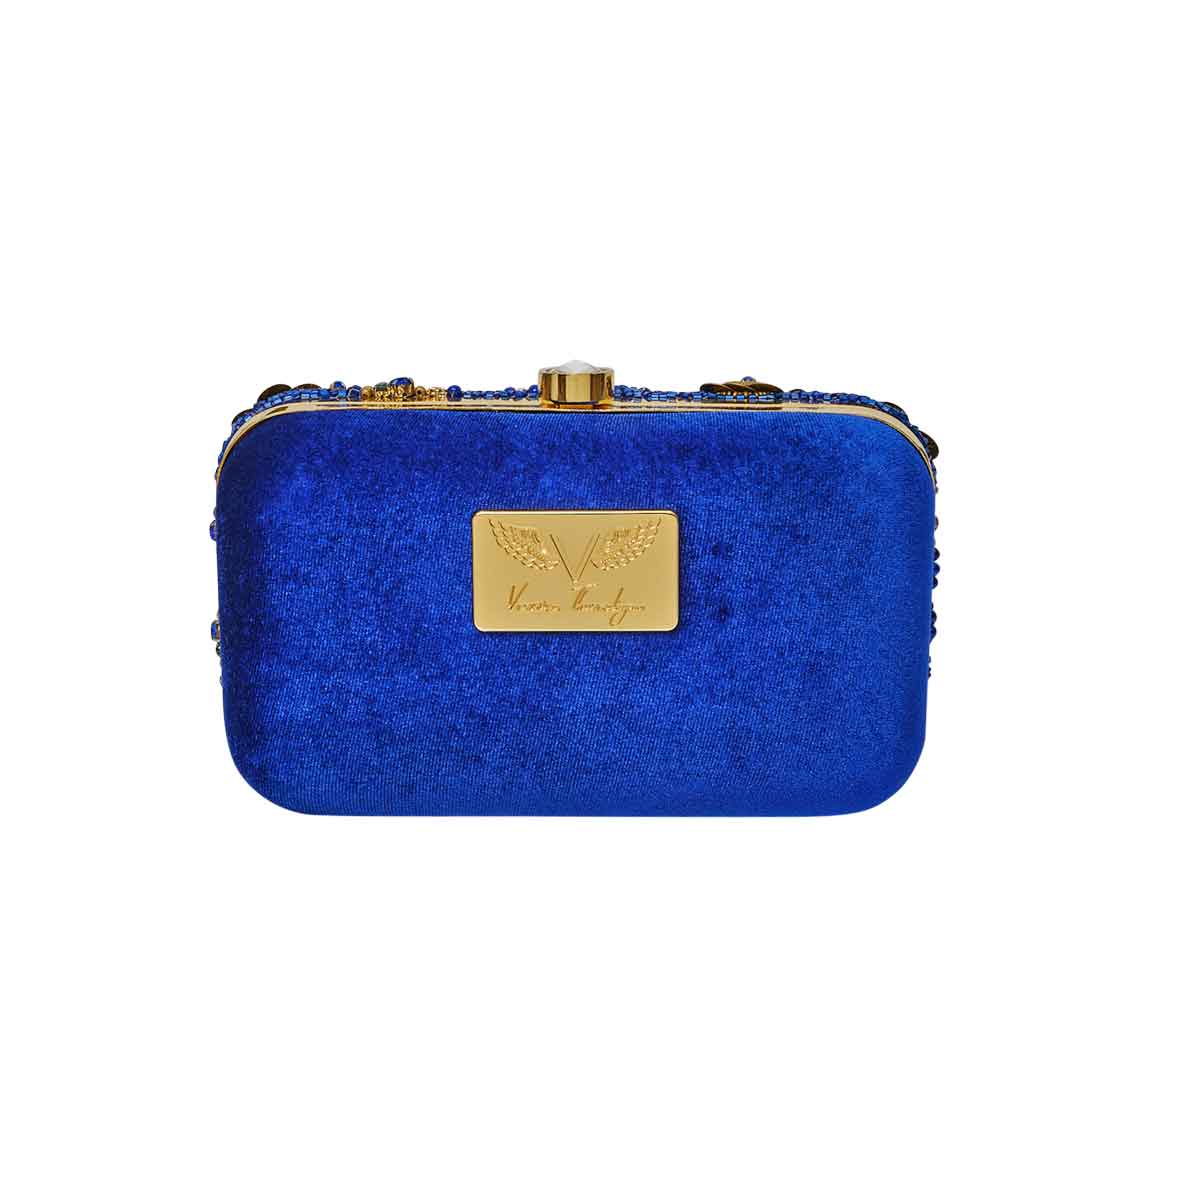 Back view of Blue and gold clutch handbag, with big stone lock. Blue velvet fabric and gold plaque with logo. Aelia Clutch from Rani Collection by Veronica Tharmalingam